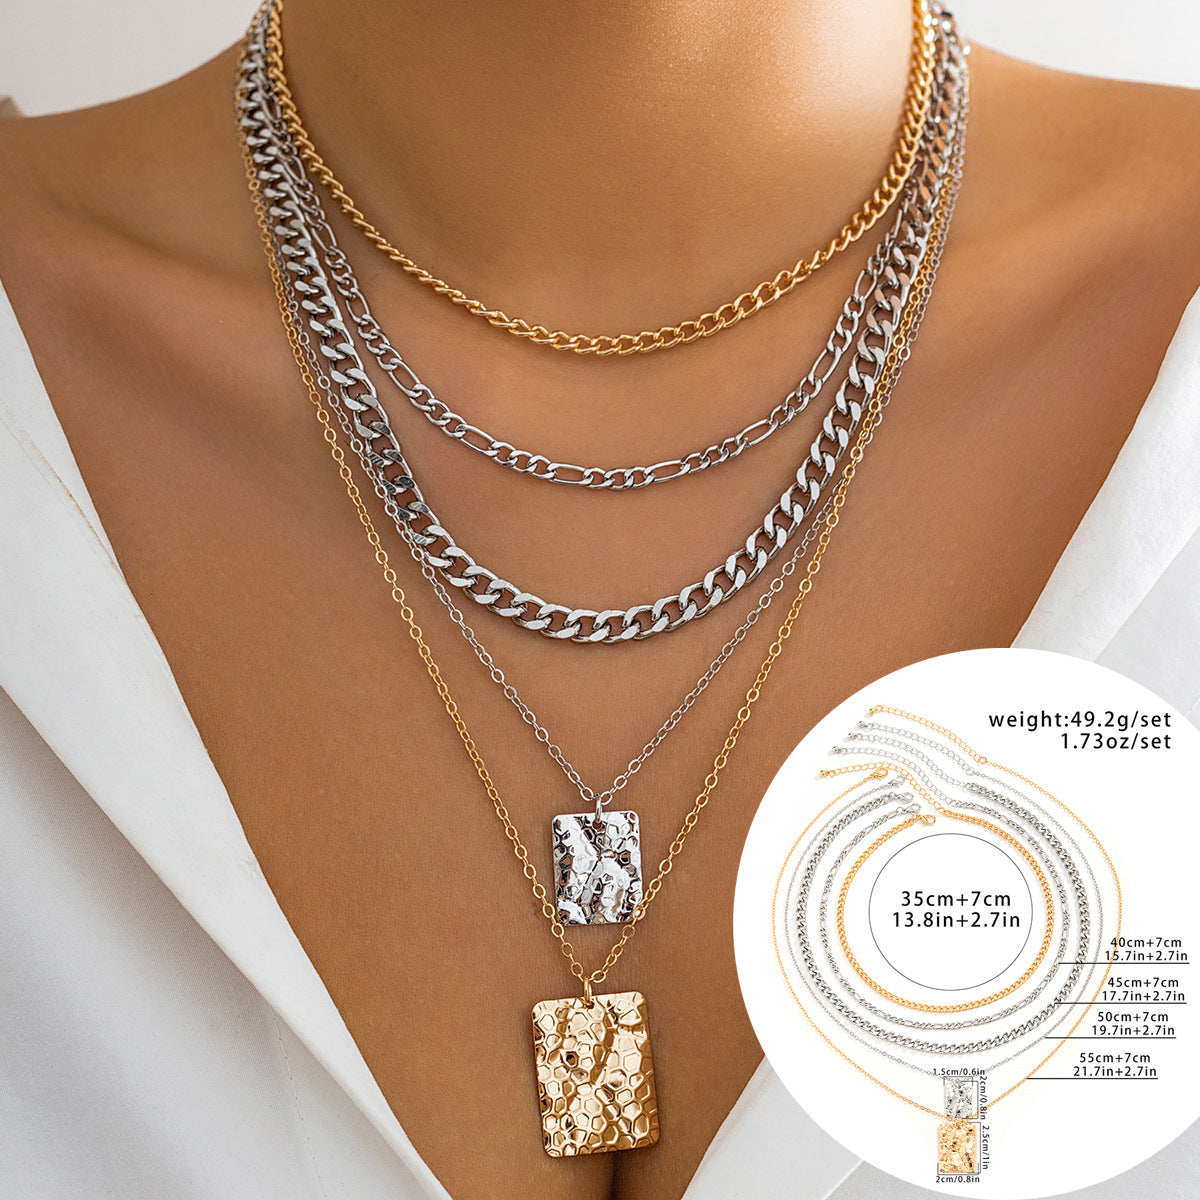 Vienna Verve Collection by Planderful - Stylish Necklace Featuring Snake Skin Design and Geometric Pendant